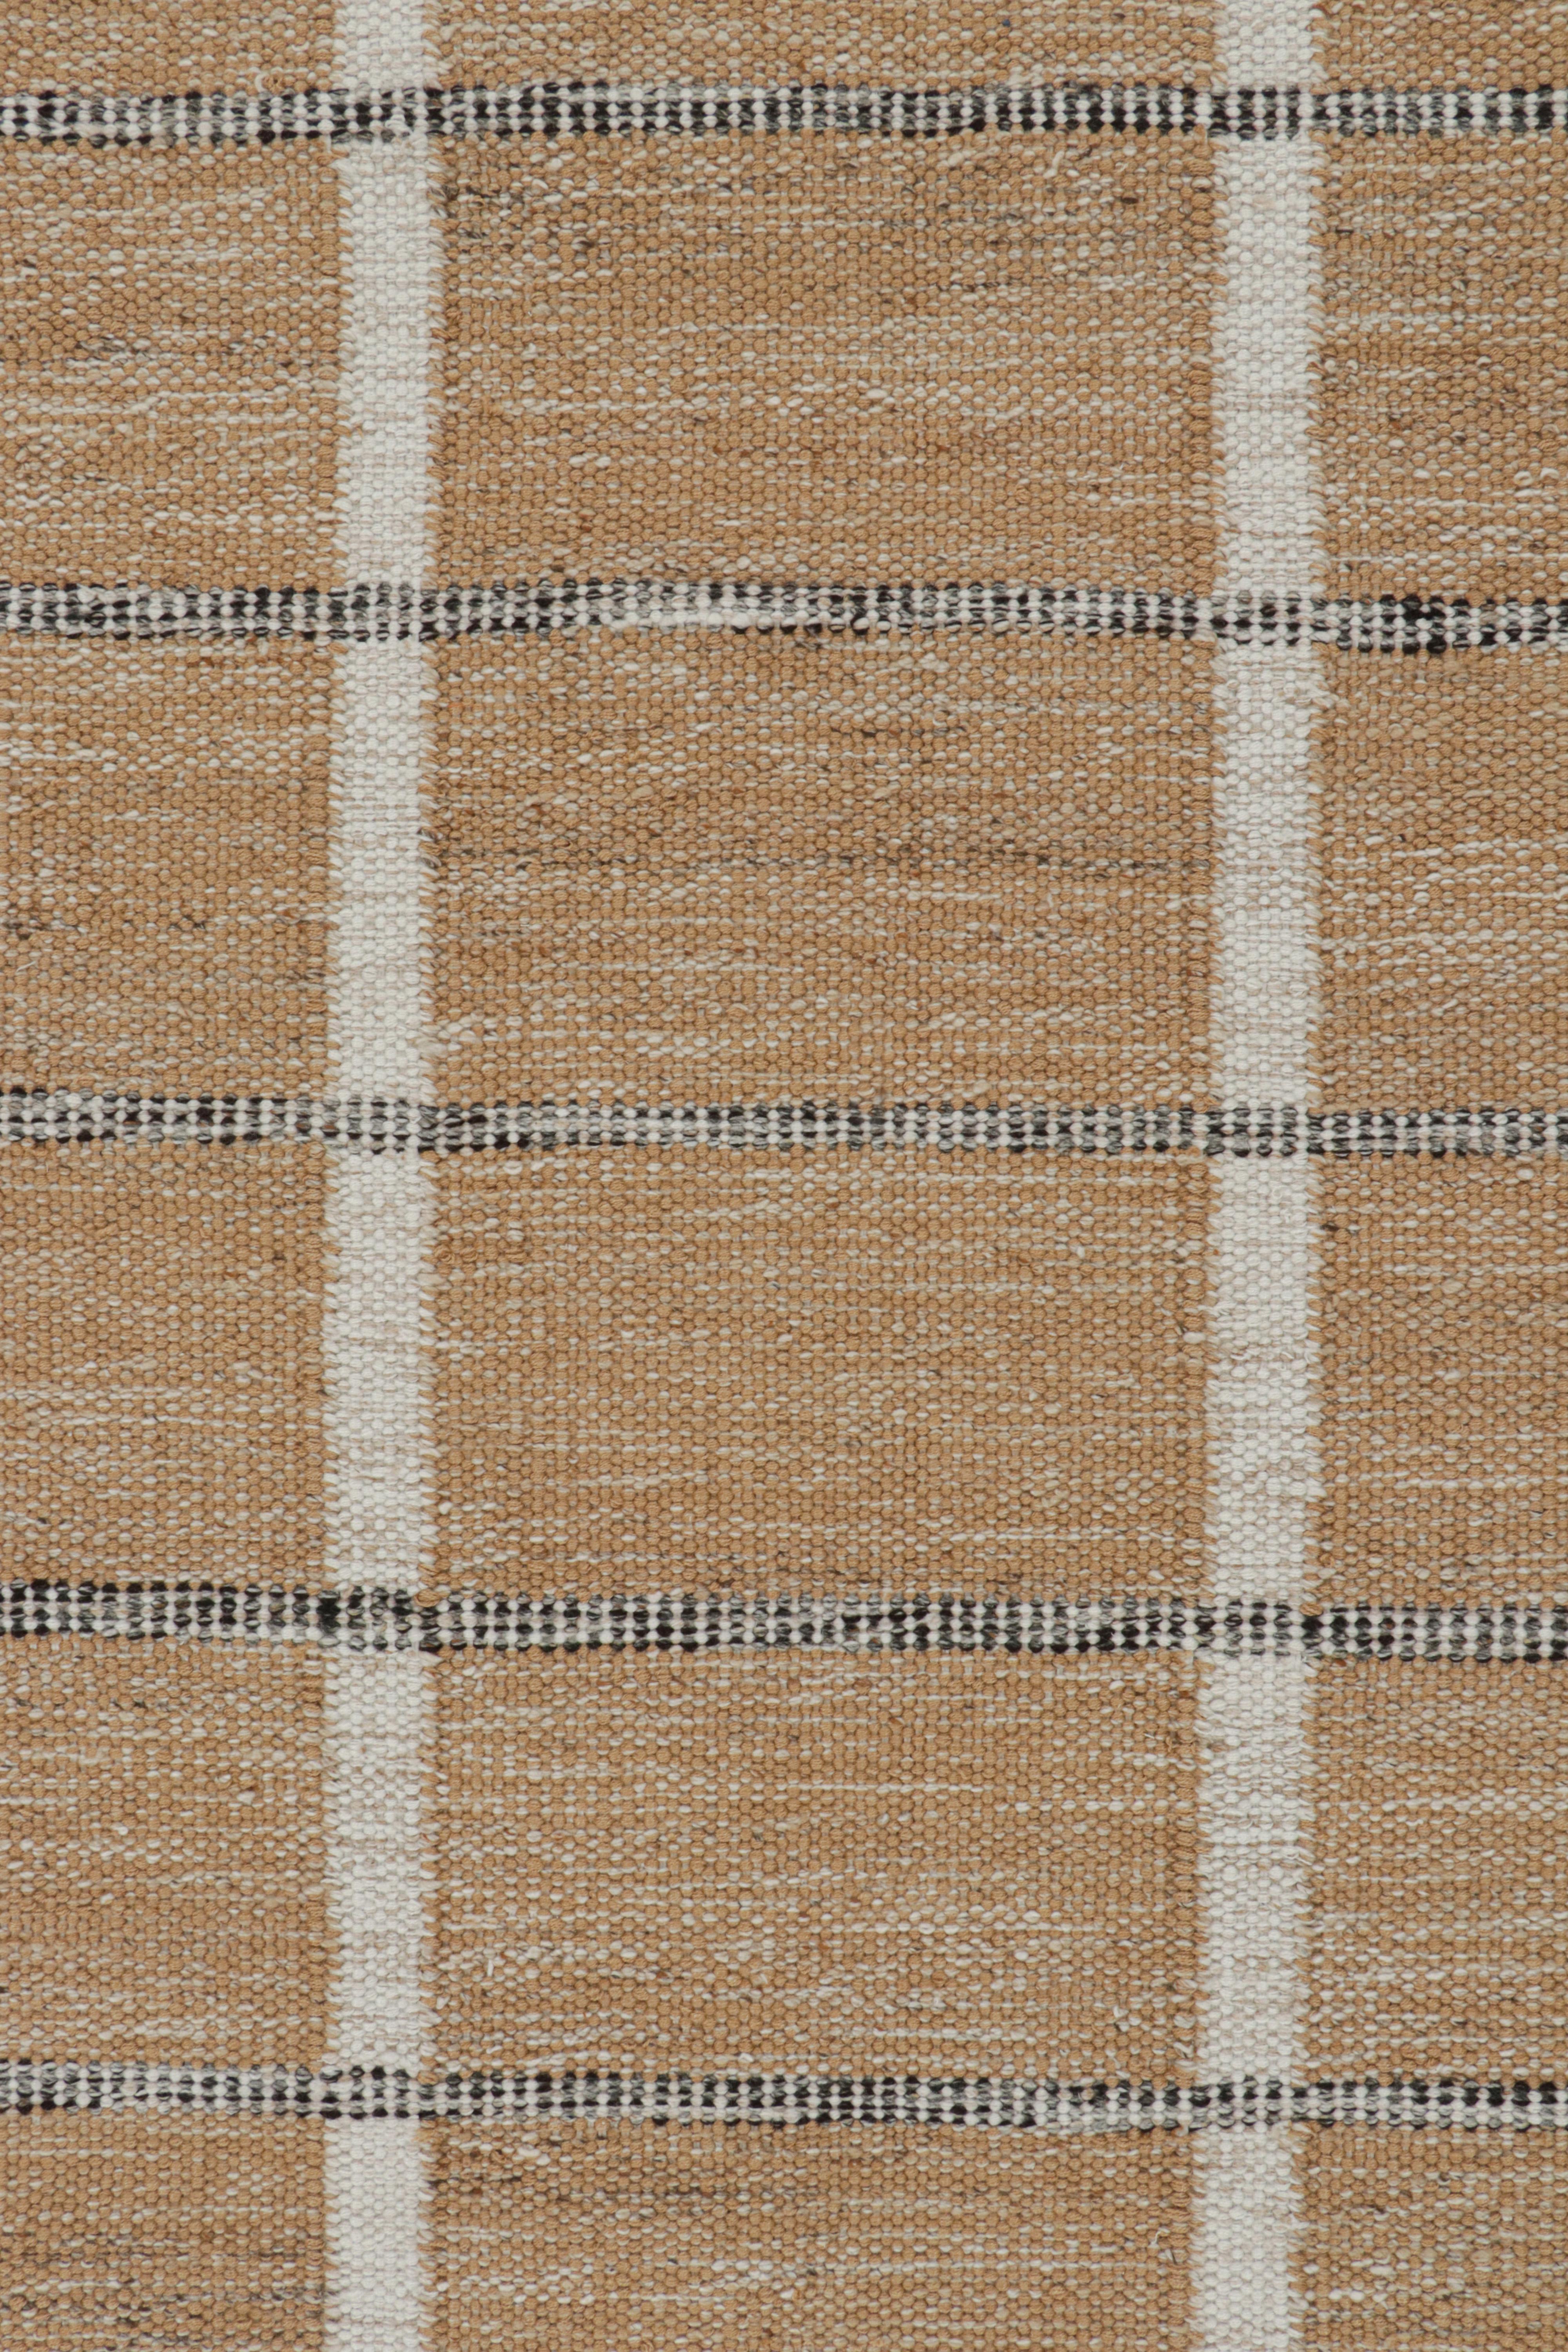 Rug & Kilim’s Scandinavian Style Outdoor Kilim in Brown, White & Black Pattern In New Condition For Sale In Long Island City, NY